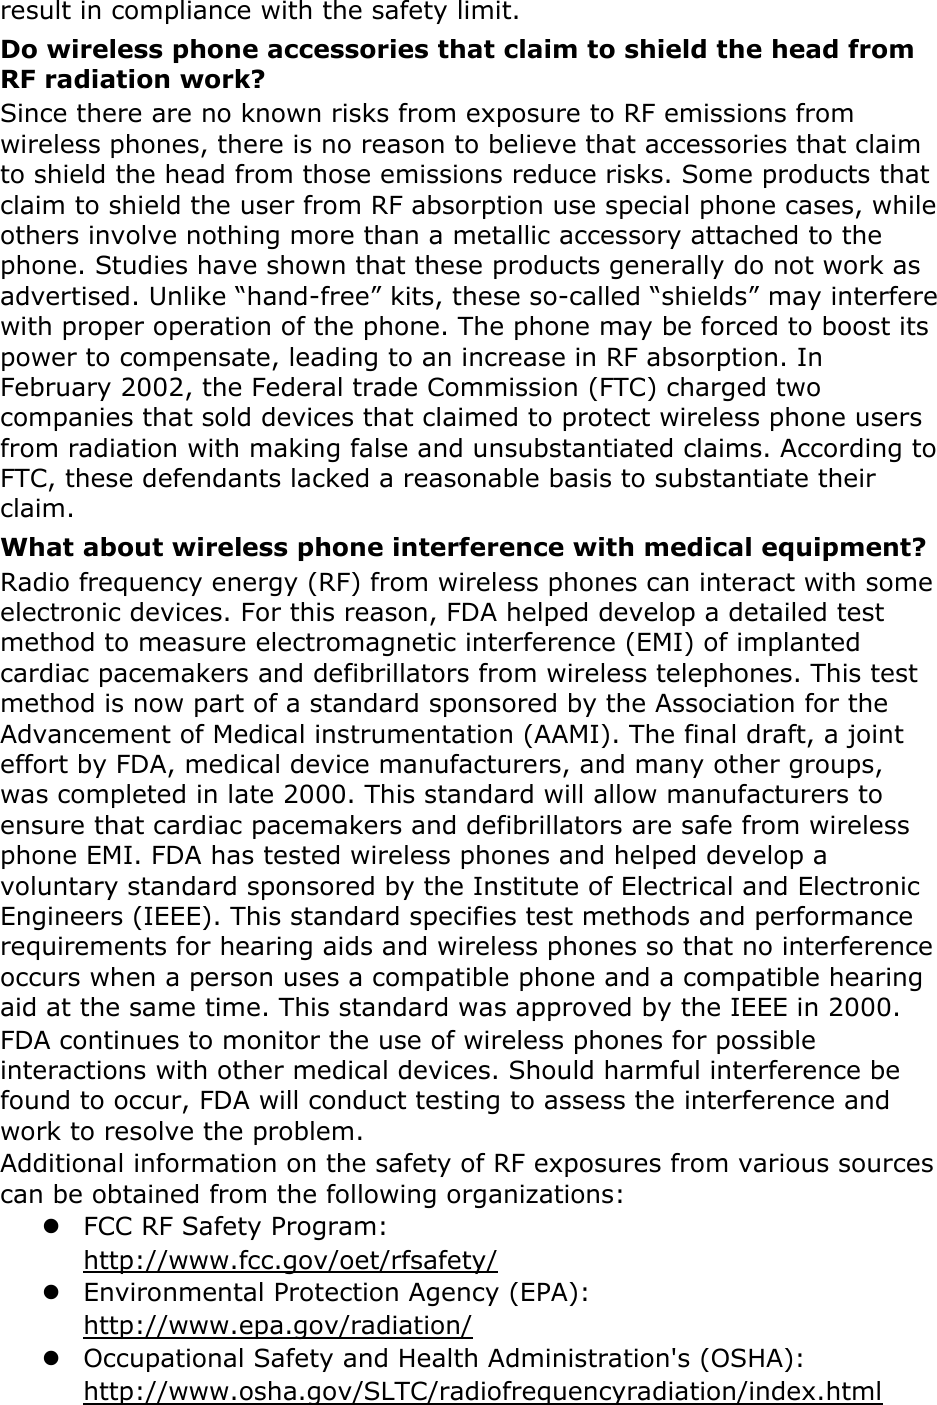 Page 12 of Samsung Electronics Co GTS3850 Cellular/PCS GSM Phone with WLAN and Bluetooth User Manual